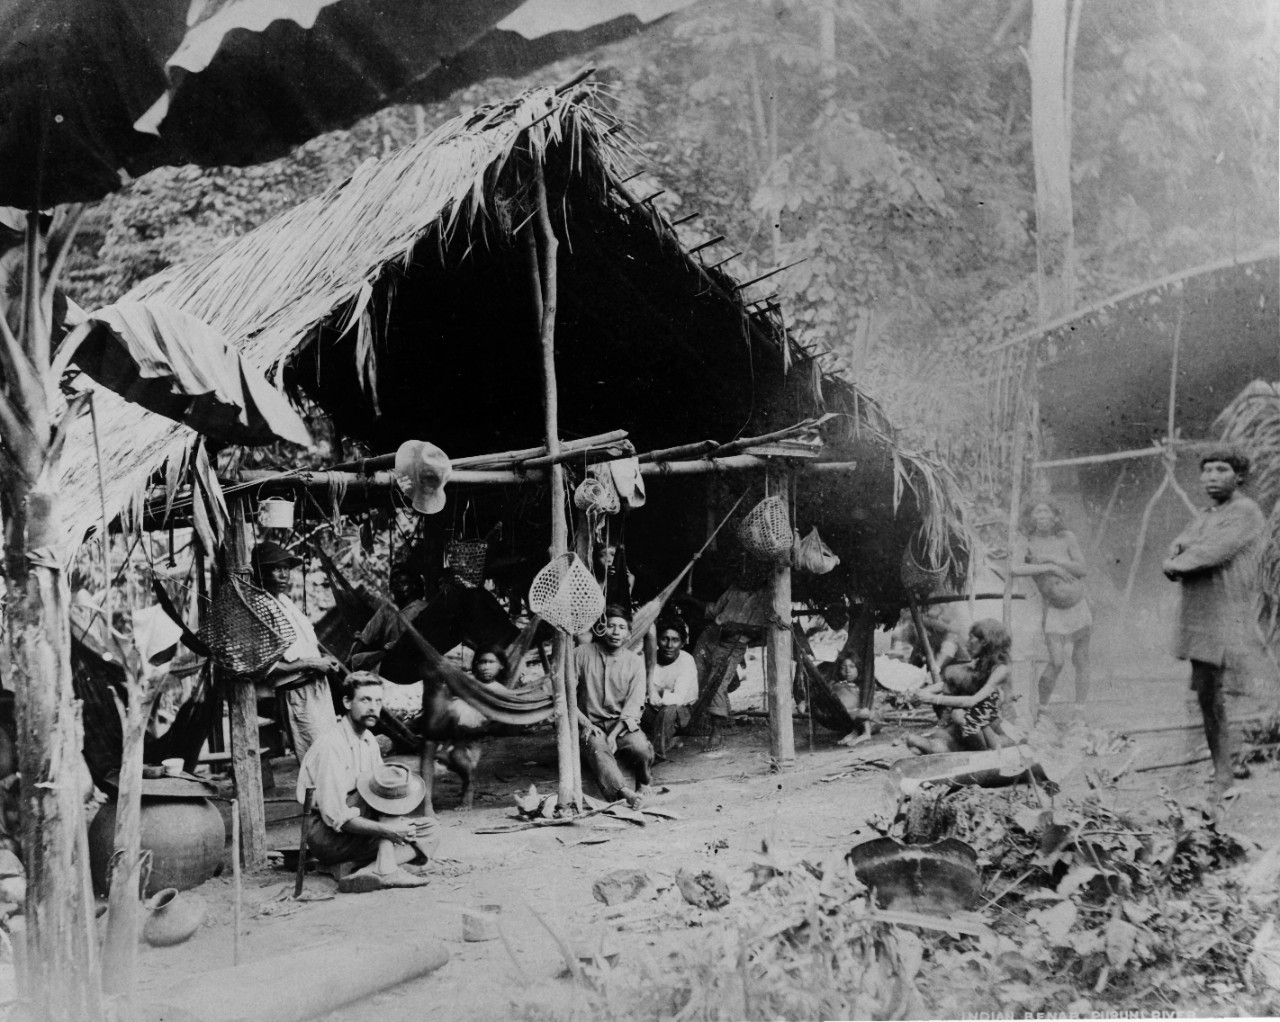 USS WILMINGTON (PG-8), a Native Indian shelter along a tributary of the Amazon River